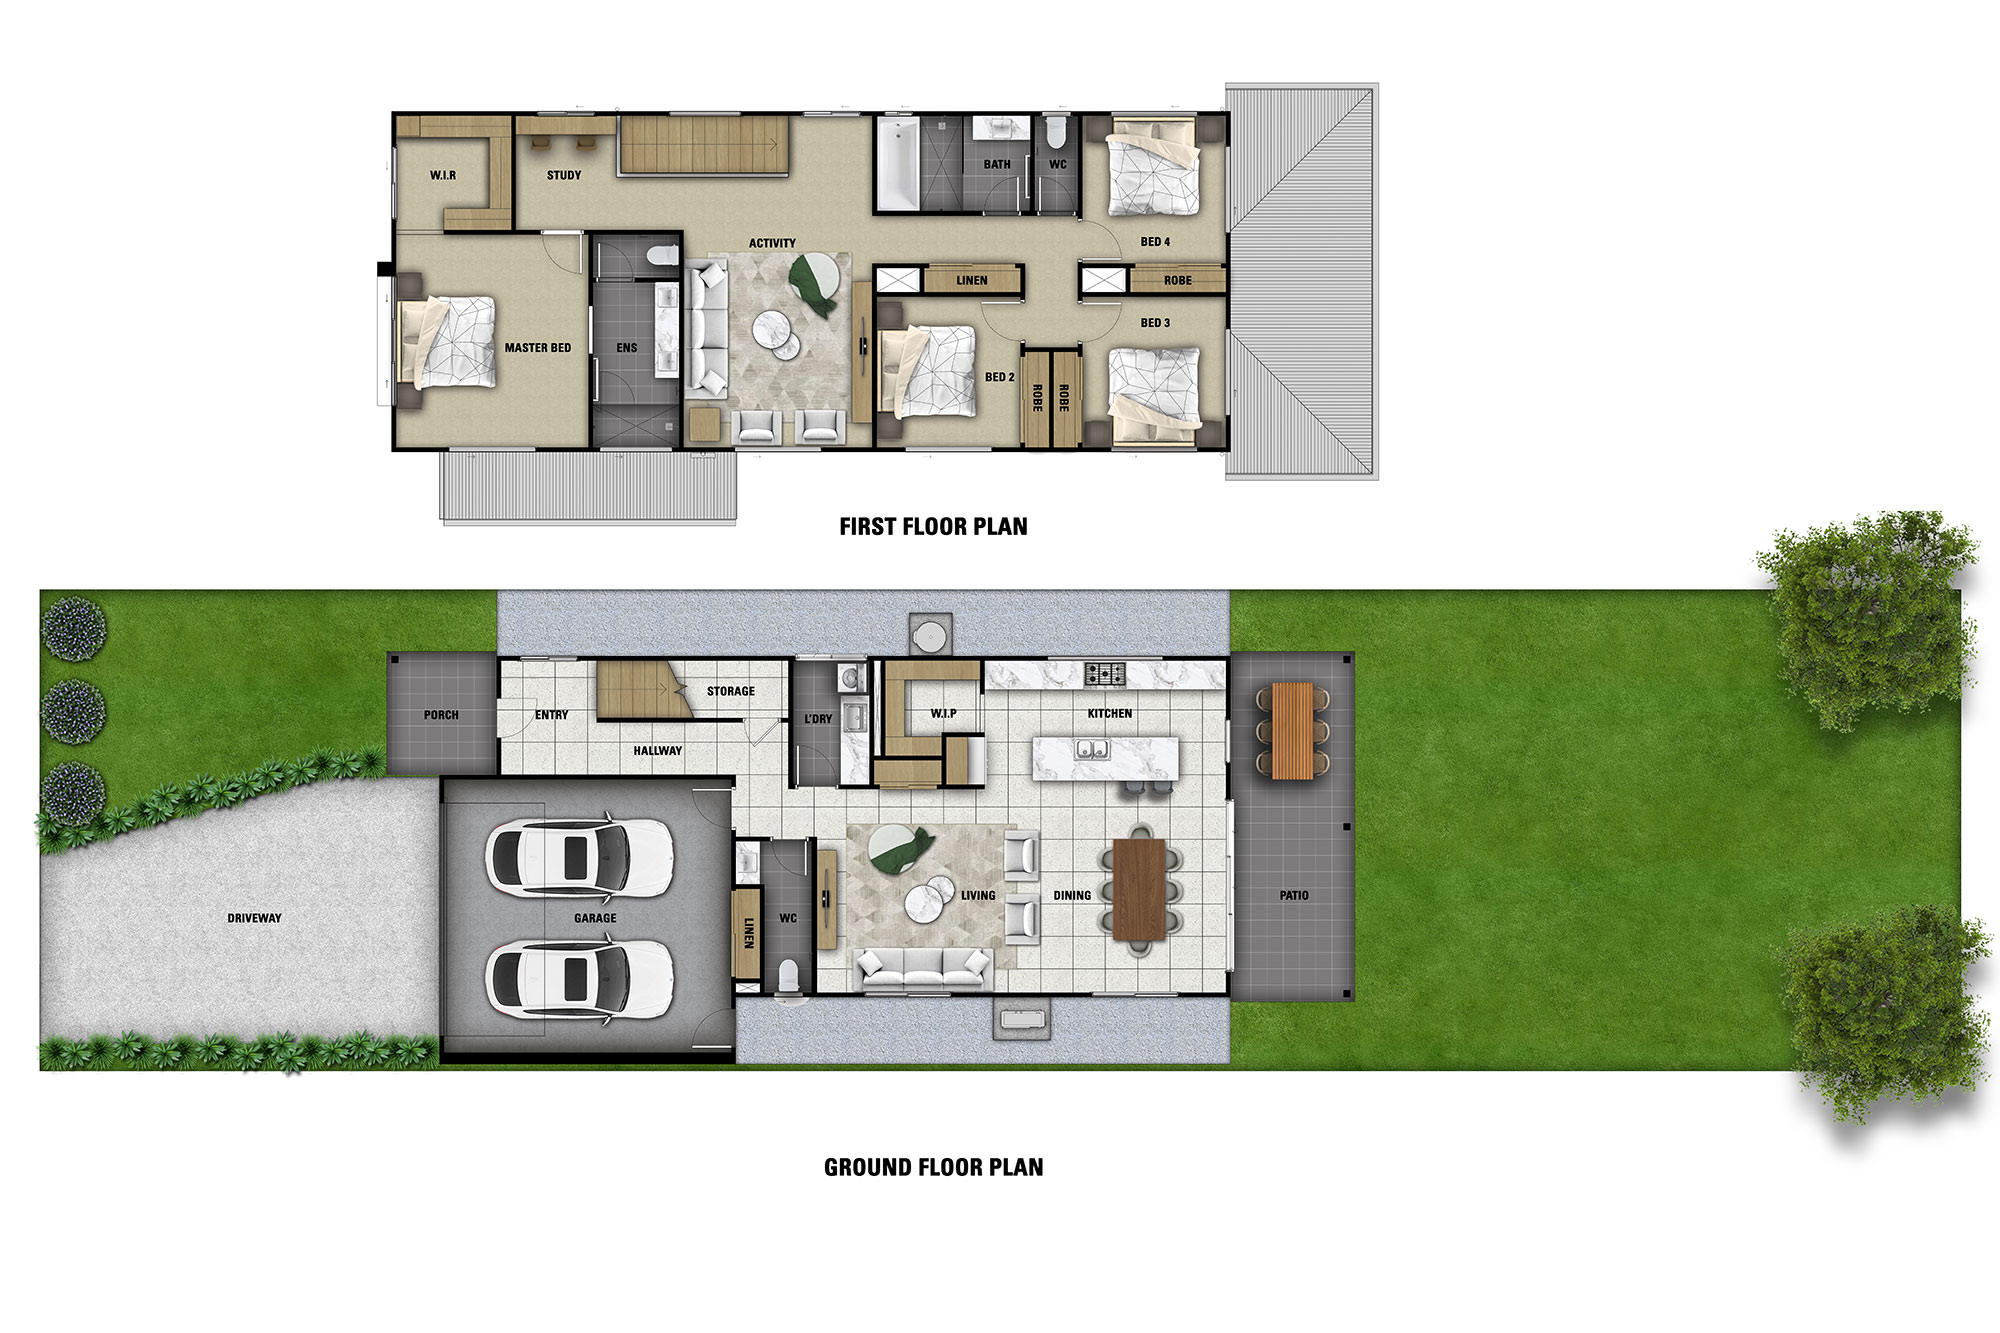 Colour Floorplan F30133 S30133 30 Enright St, Oxley & 30a Enright St, Oxley 30